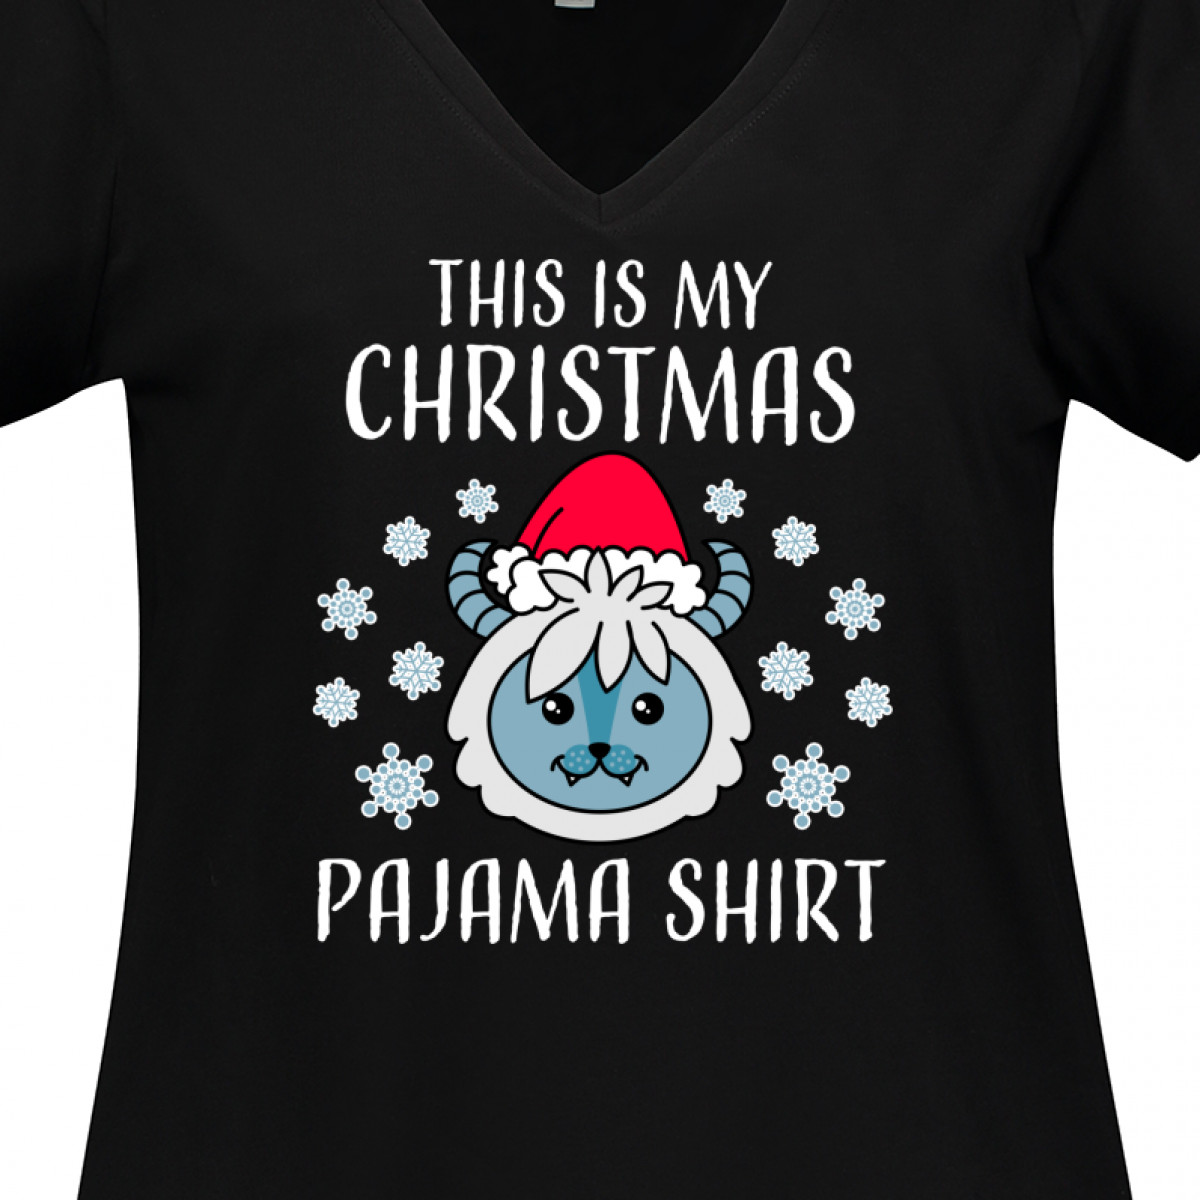 Inktastic This is My Christmas Pajama Shirt with Snow Monster Women's Plus Size V-Neck T-Shirt - image 3 of 4